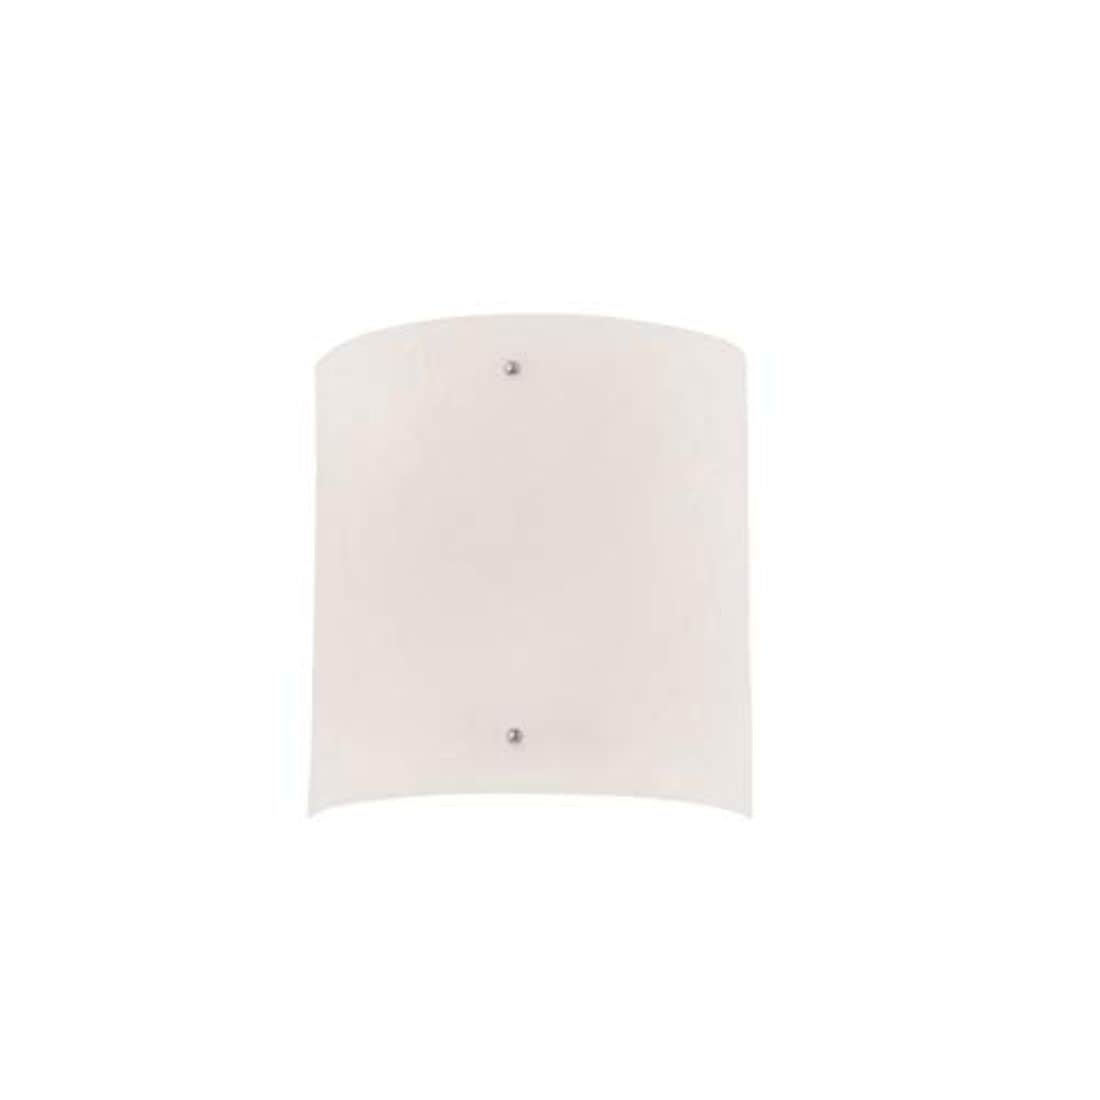 Buy Design House 578575 Grafton Led Wall Sconce Satin Nickel Or Oil Rubbed Bronze Online Shop Home And Garden On Carrefour Uae